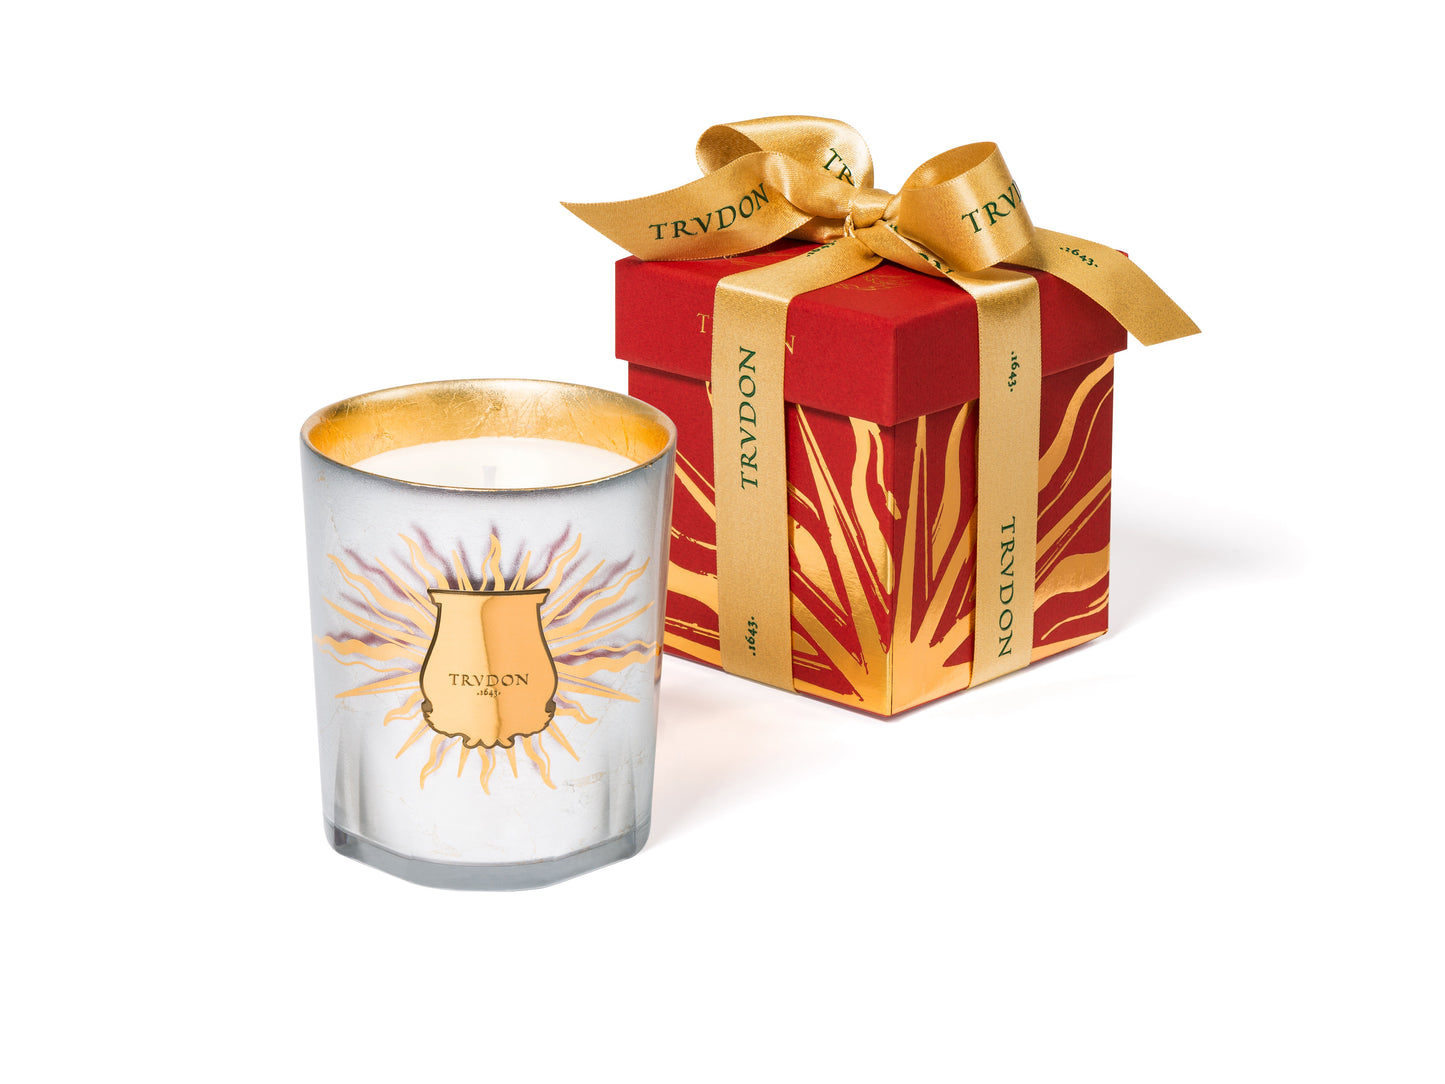 Trudon Holiday Edition Altair Classic Scented Candle